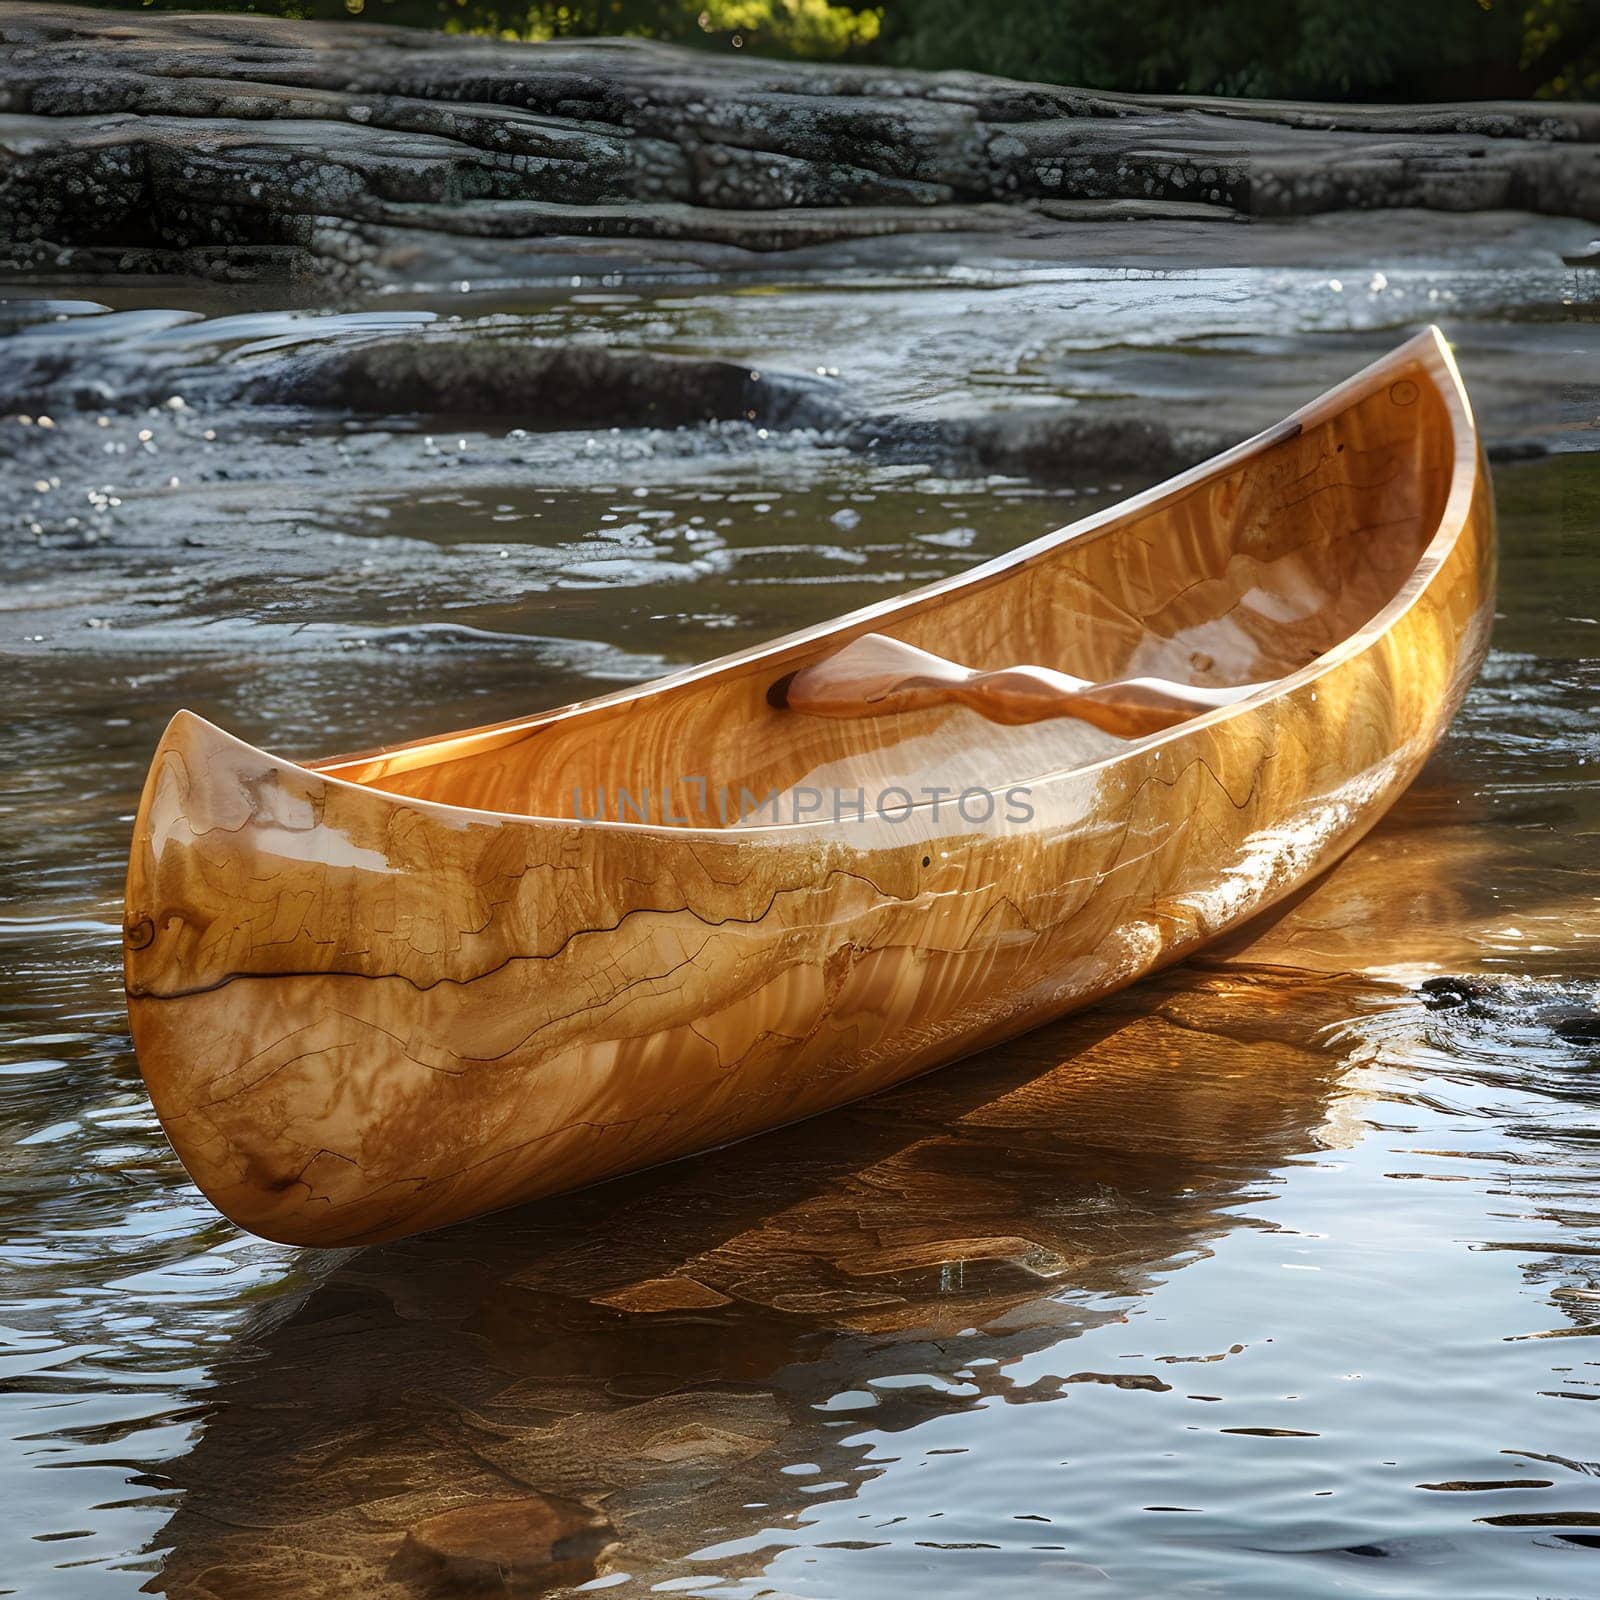 A wooden canoe glides on the water surface, surrounded by trees and plants by Nadtochiy